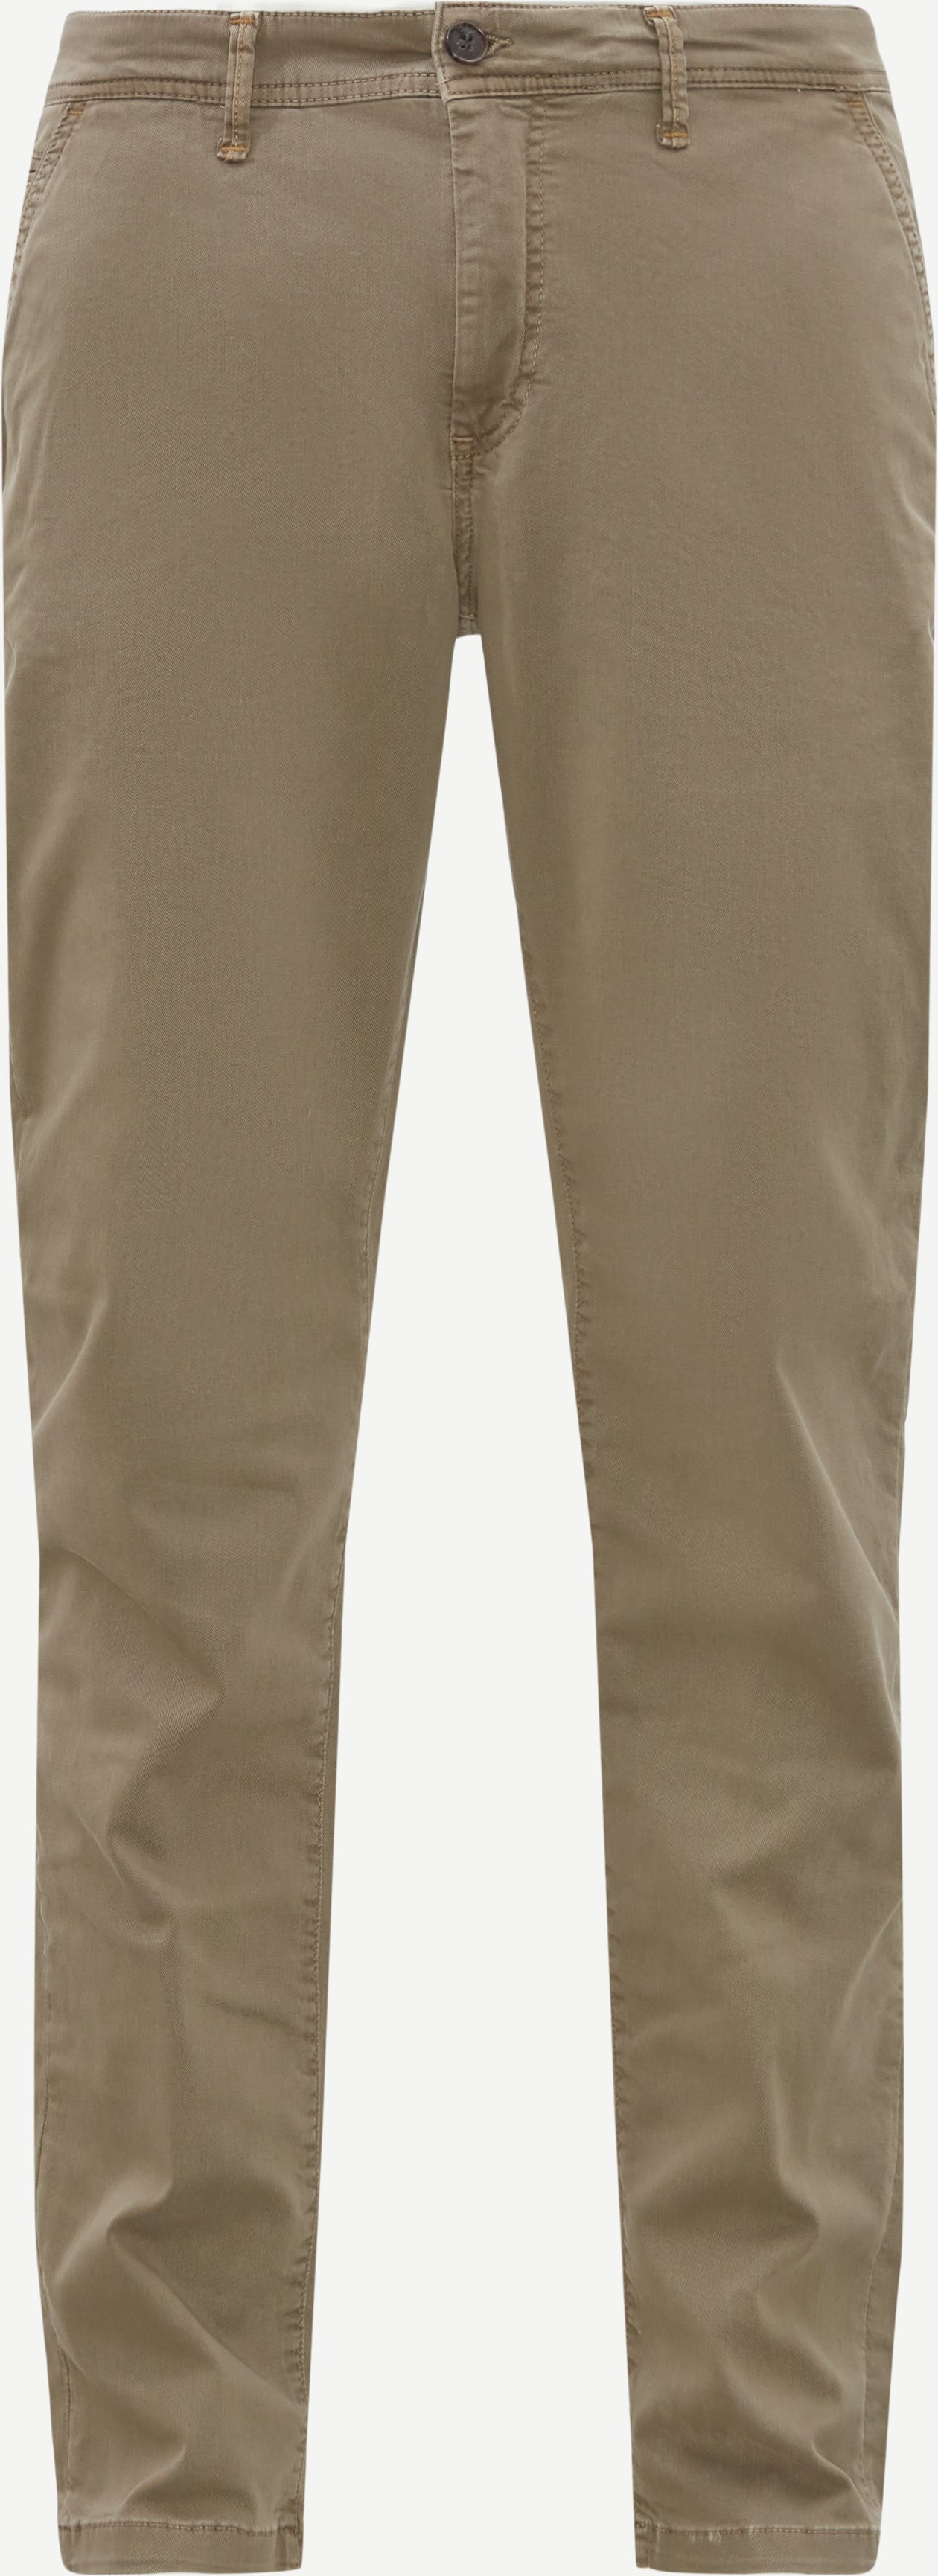 Signal Trousers 11277 607 FW22 Sand